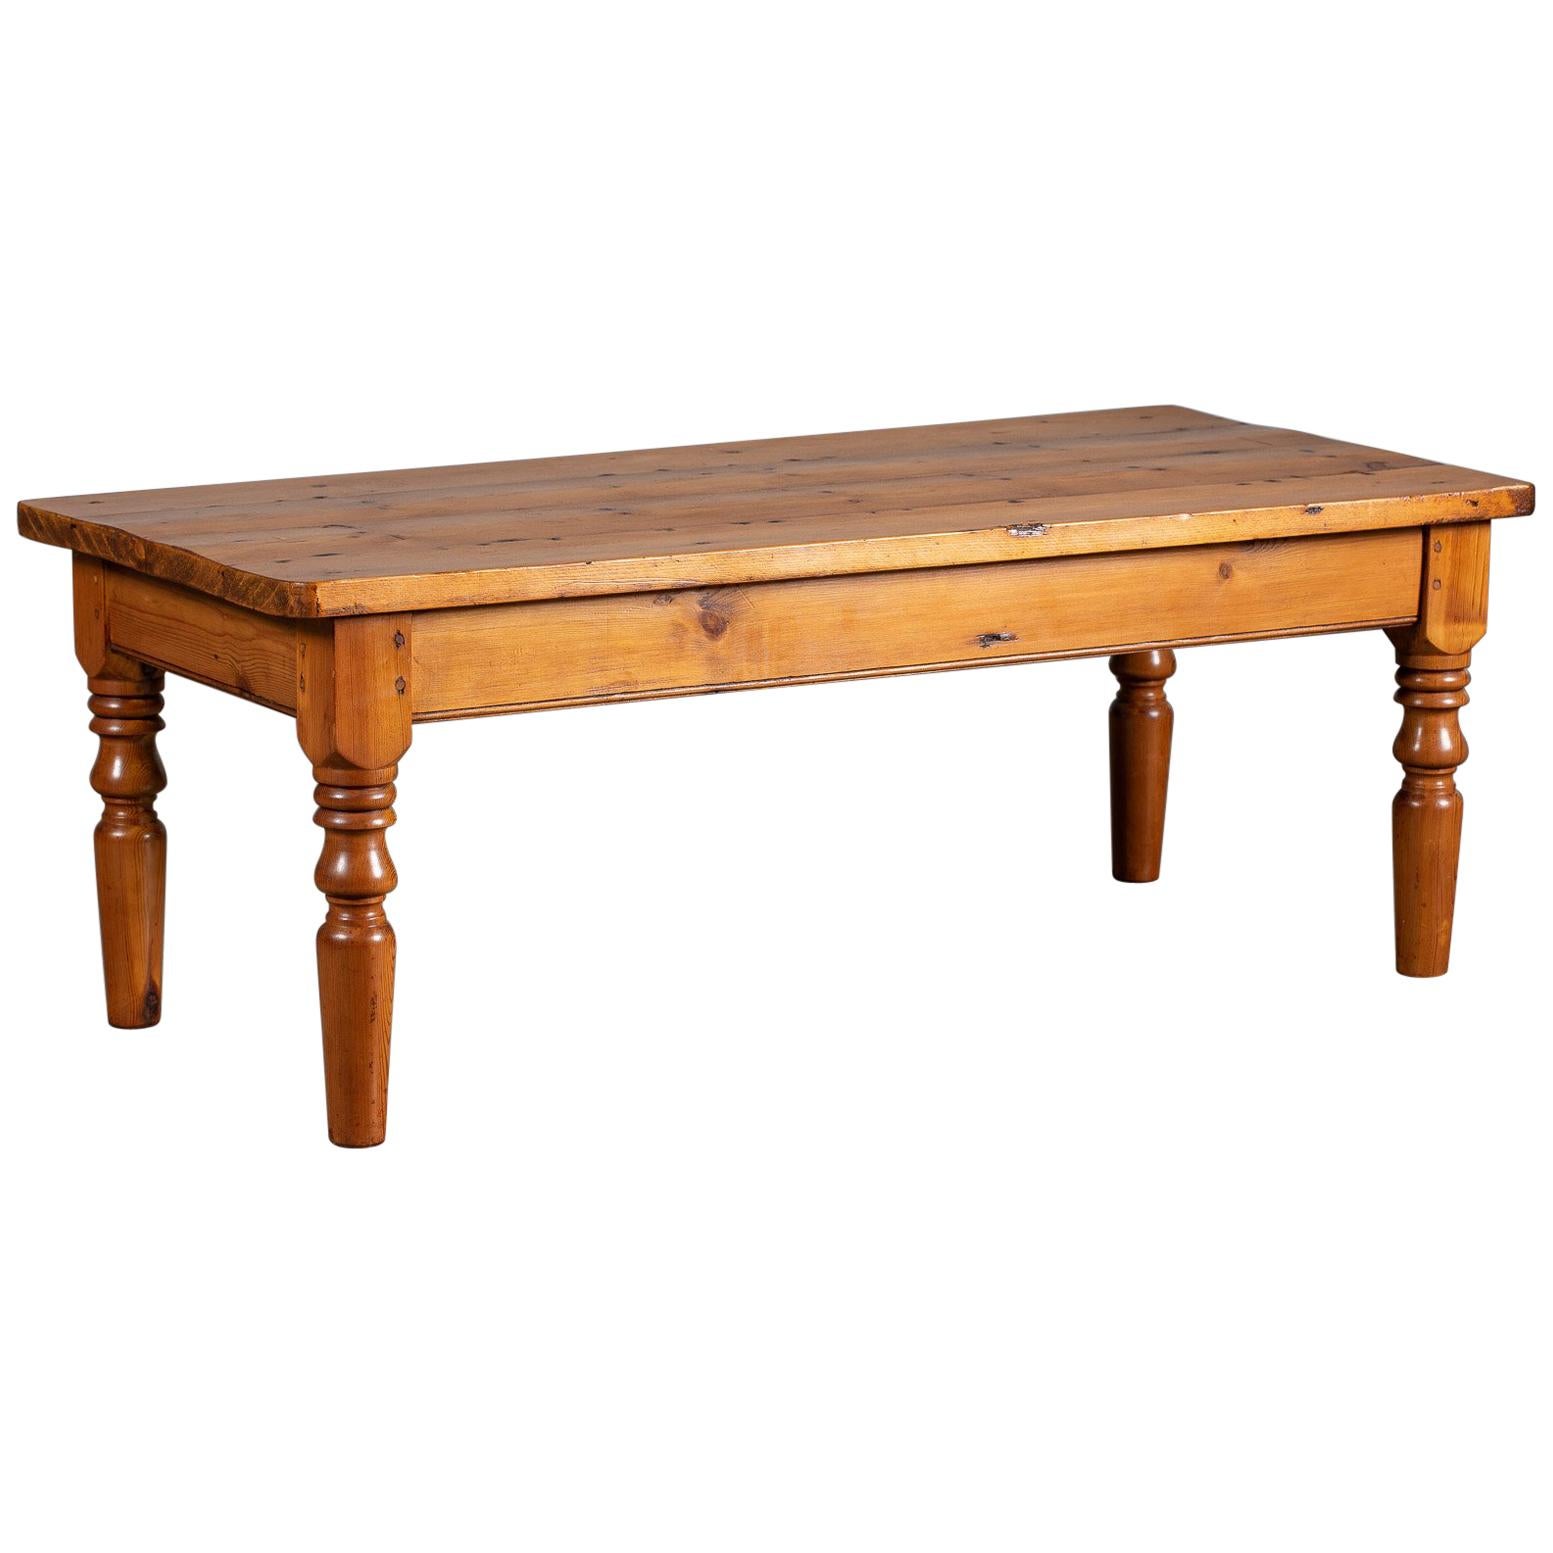 Antique English Pine Coffee Table Turned Legs, circa 1875 For Sale